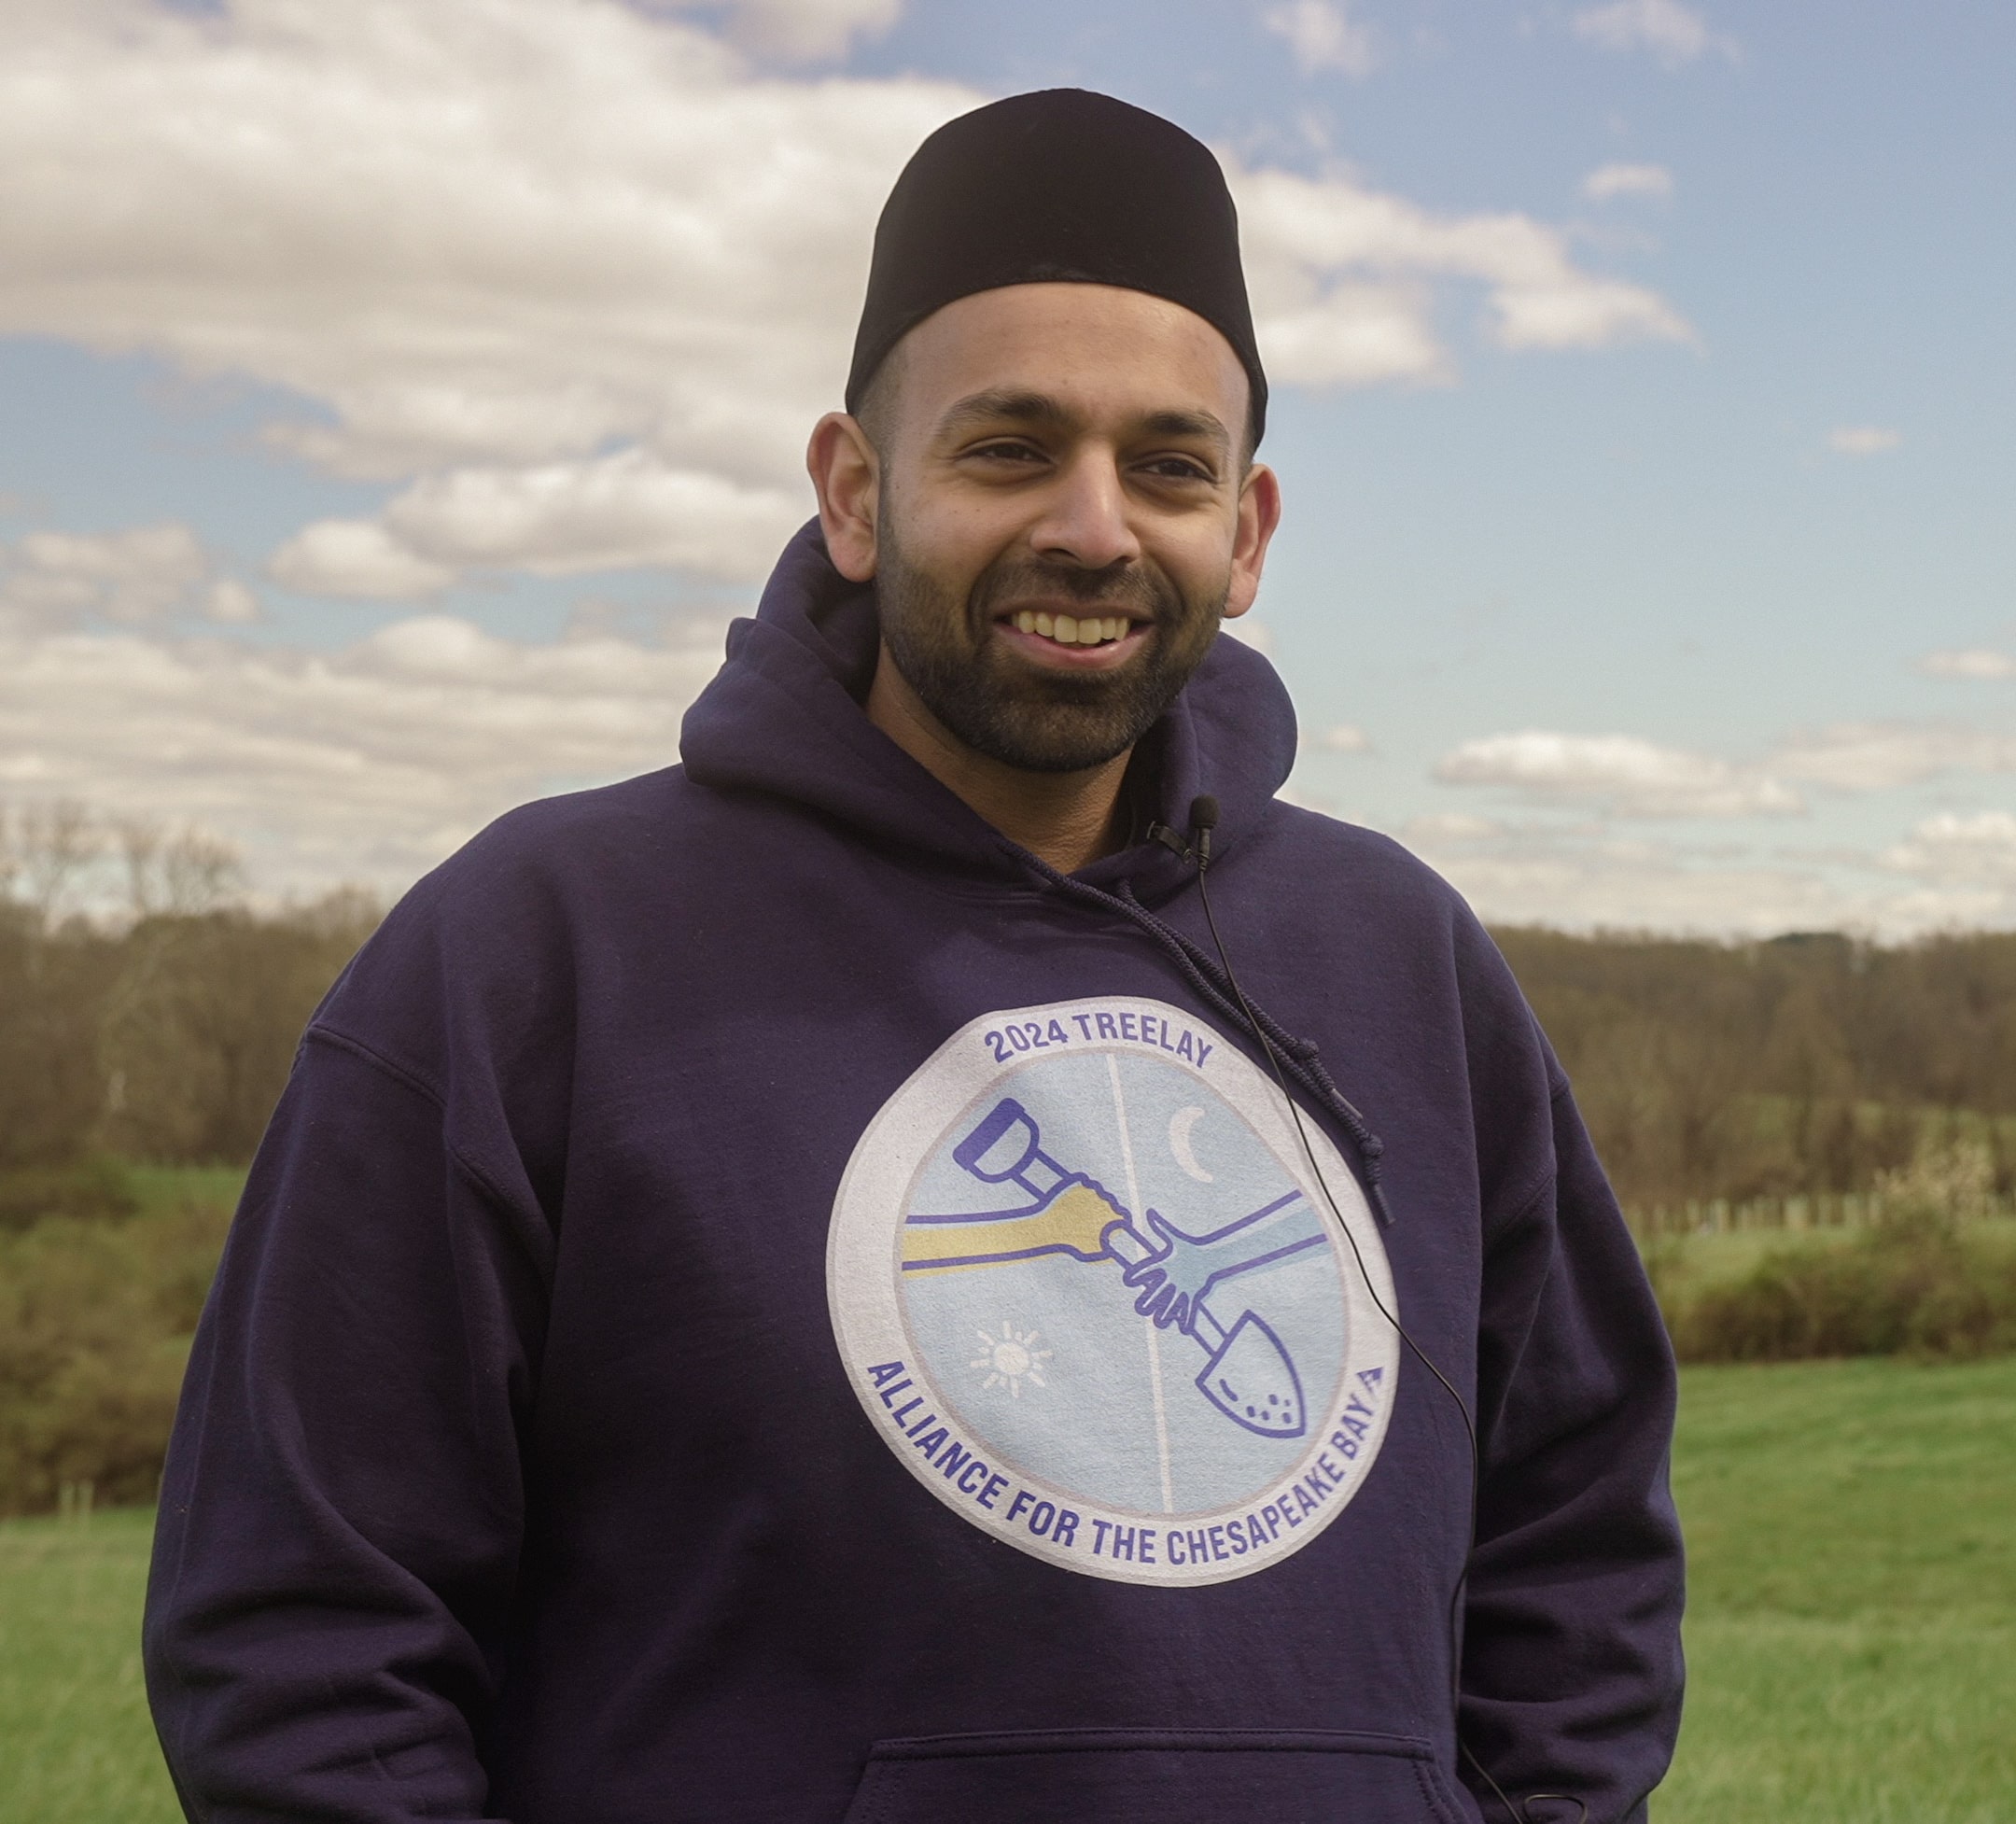 A person smiling for a photo in a field, wearing a Treelay sweatshirt